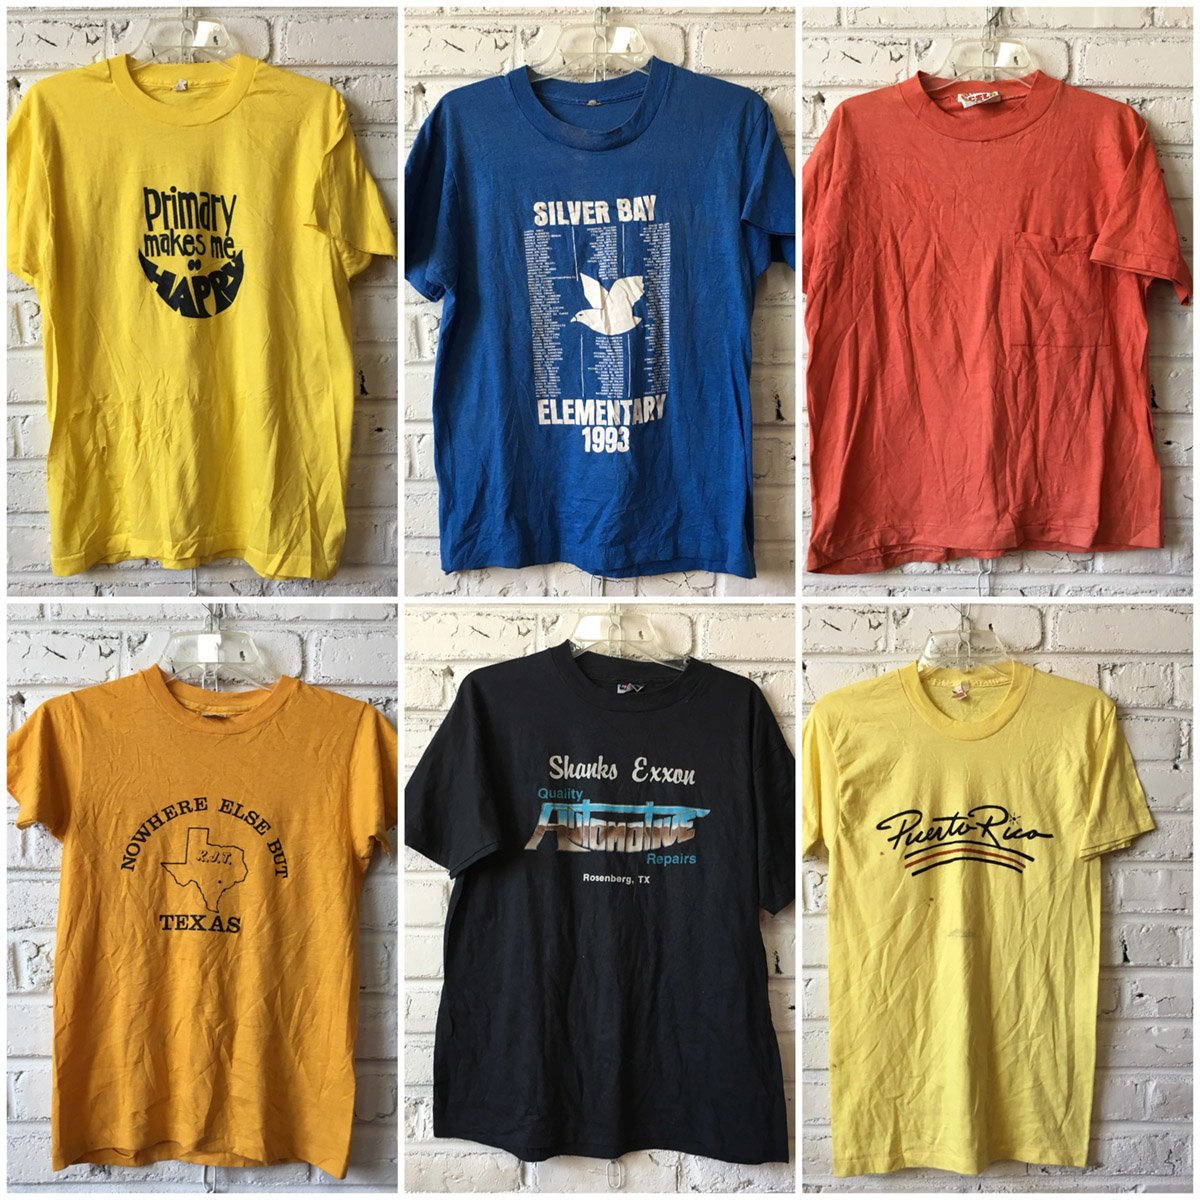 Women's Vintage T-shirts 70's 80s 90s. Singles or in 